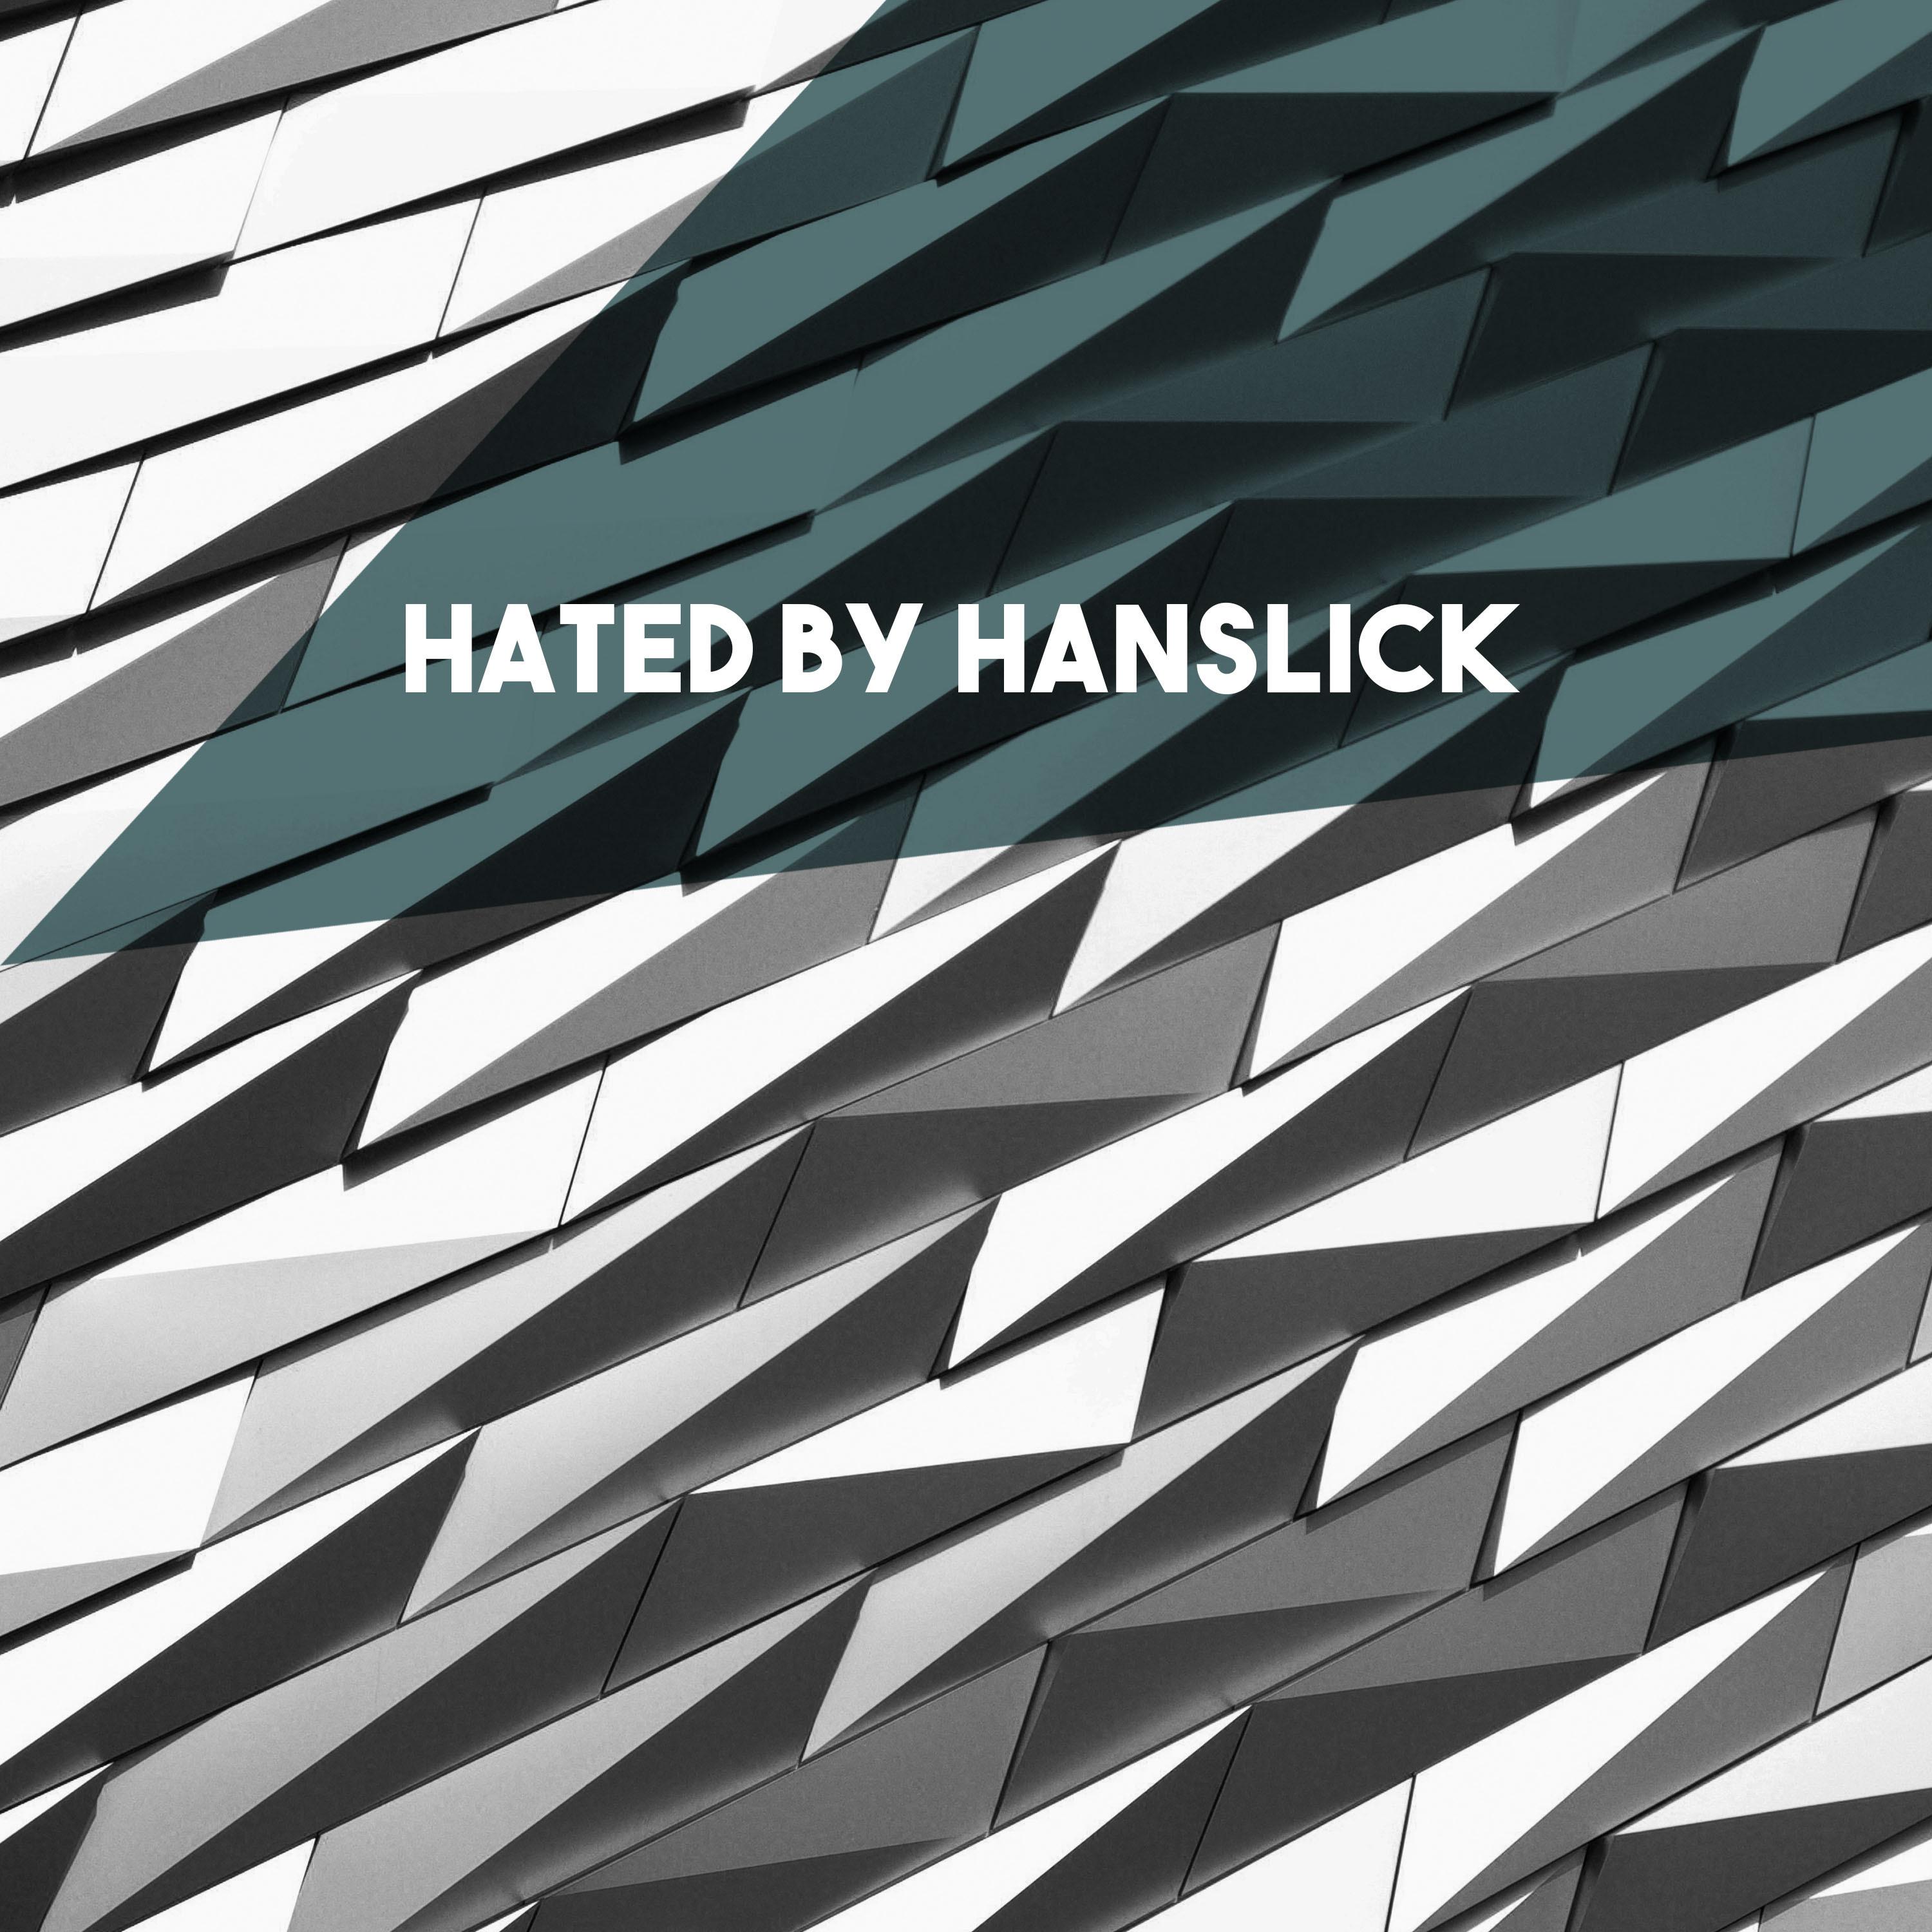 Hated by Hanslick